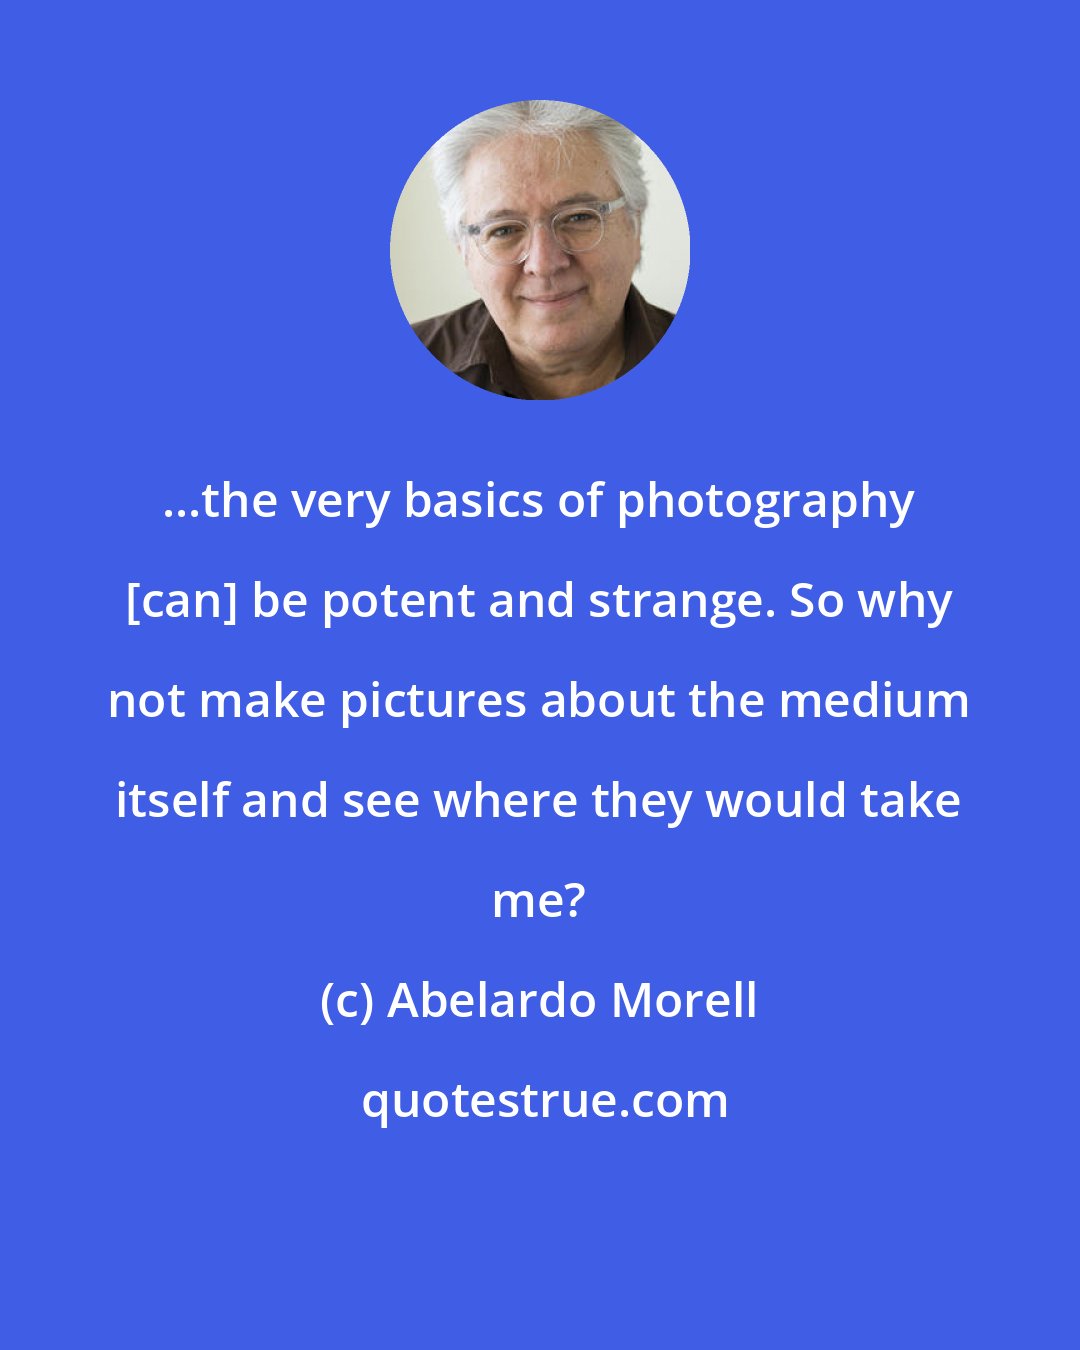 Abelardo Morell: ...the very basics of photography [can] be potent and strange. So why not make pictures about the medium itself and see where they would take me?